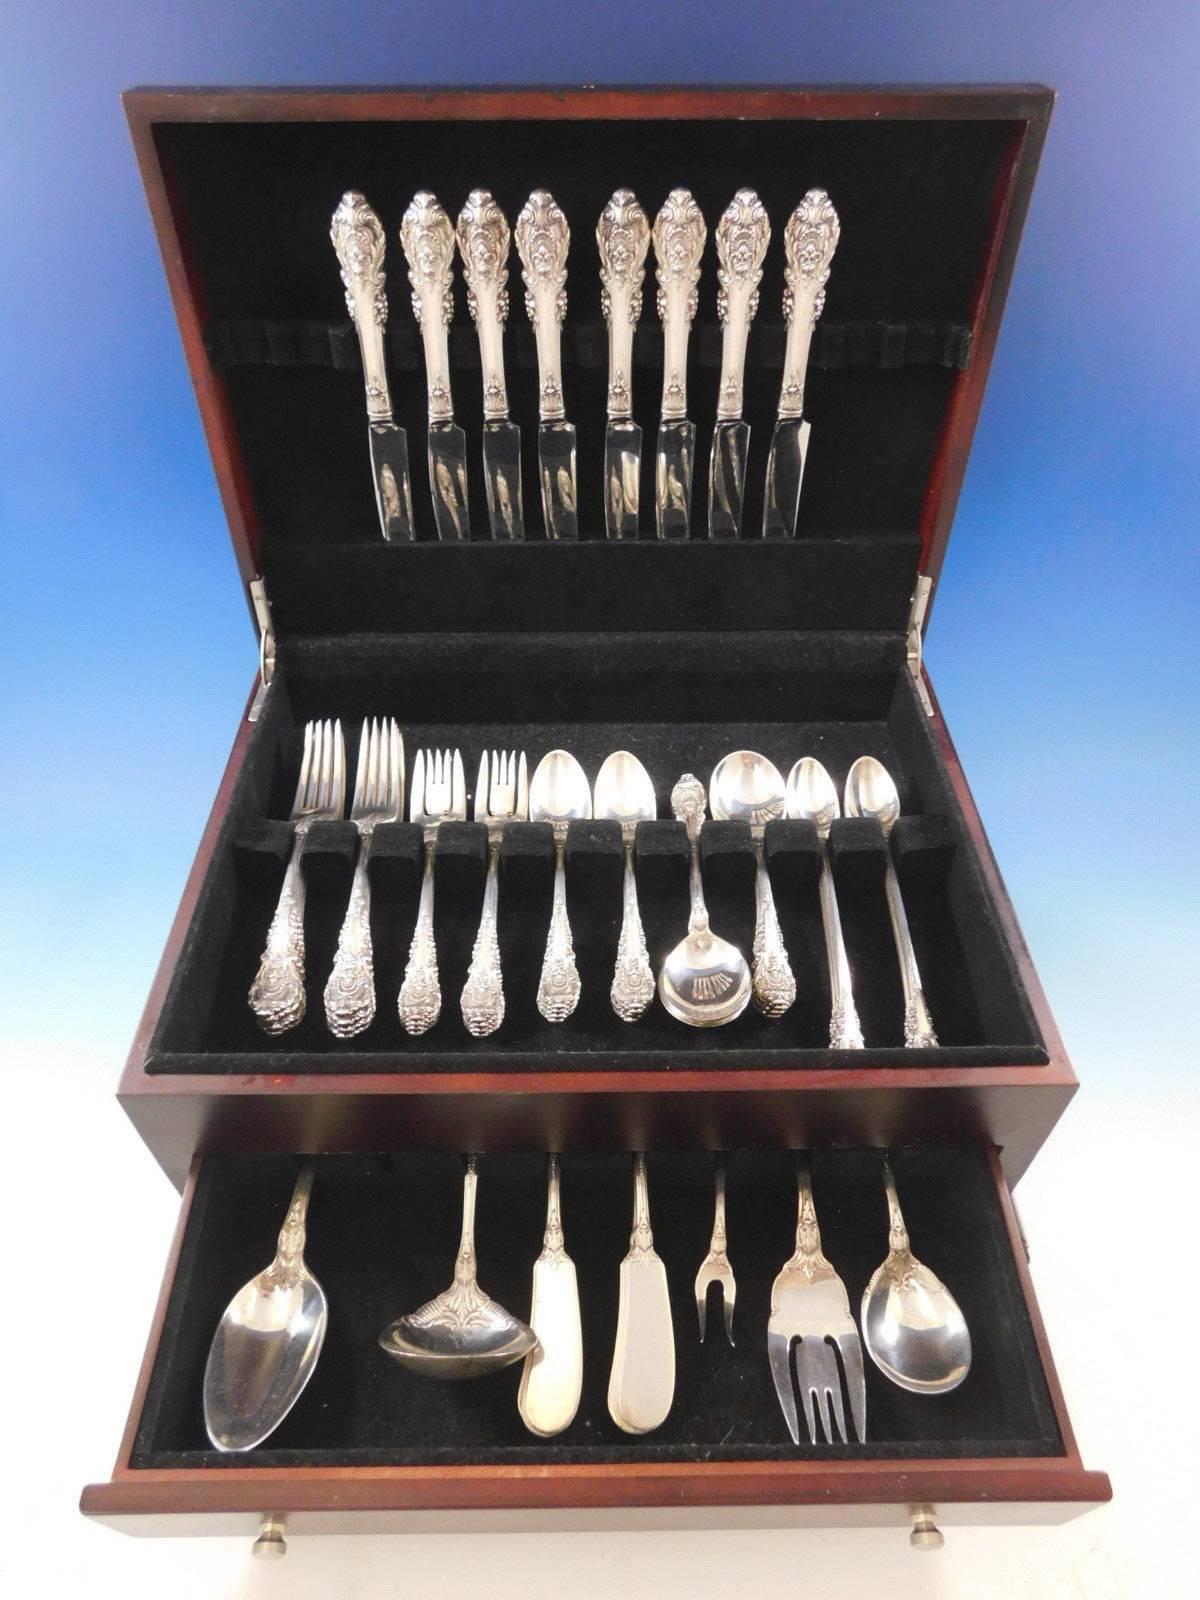 Gorgeous Sir Christopher by Wallace sterling silver Flatware set, 61 pieces. This set includes:

8 Knives, 8 7/8